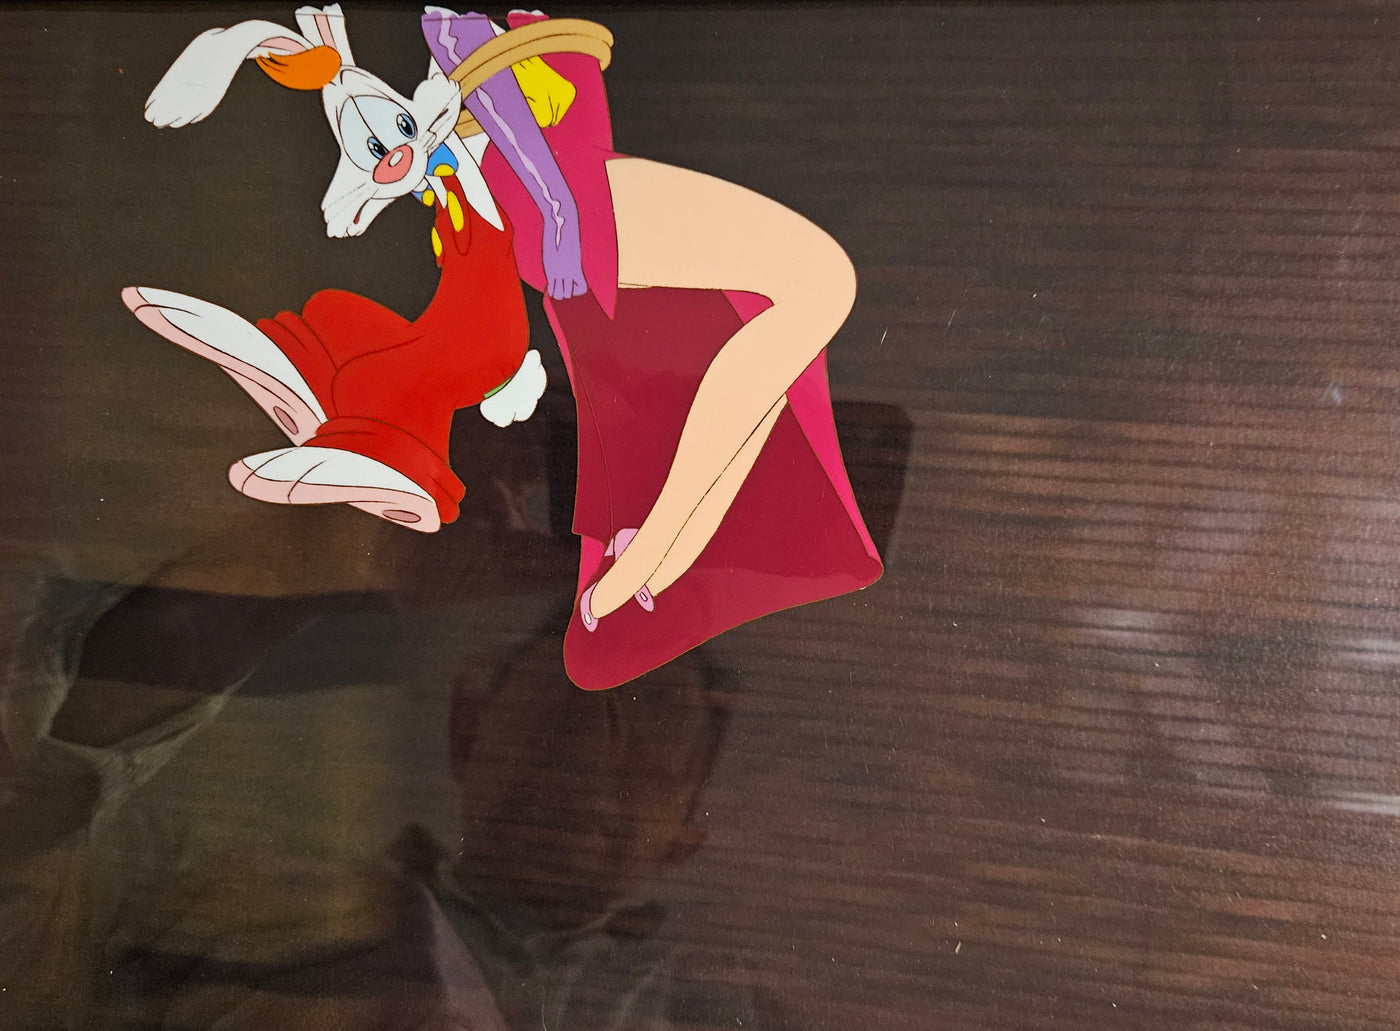 Original Walt Disney Production Cel from Who Framed Roger Rabbit? featuring Roger Rabbit and Jessica Rabbit